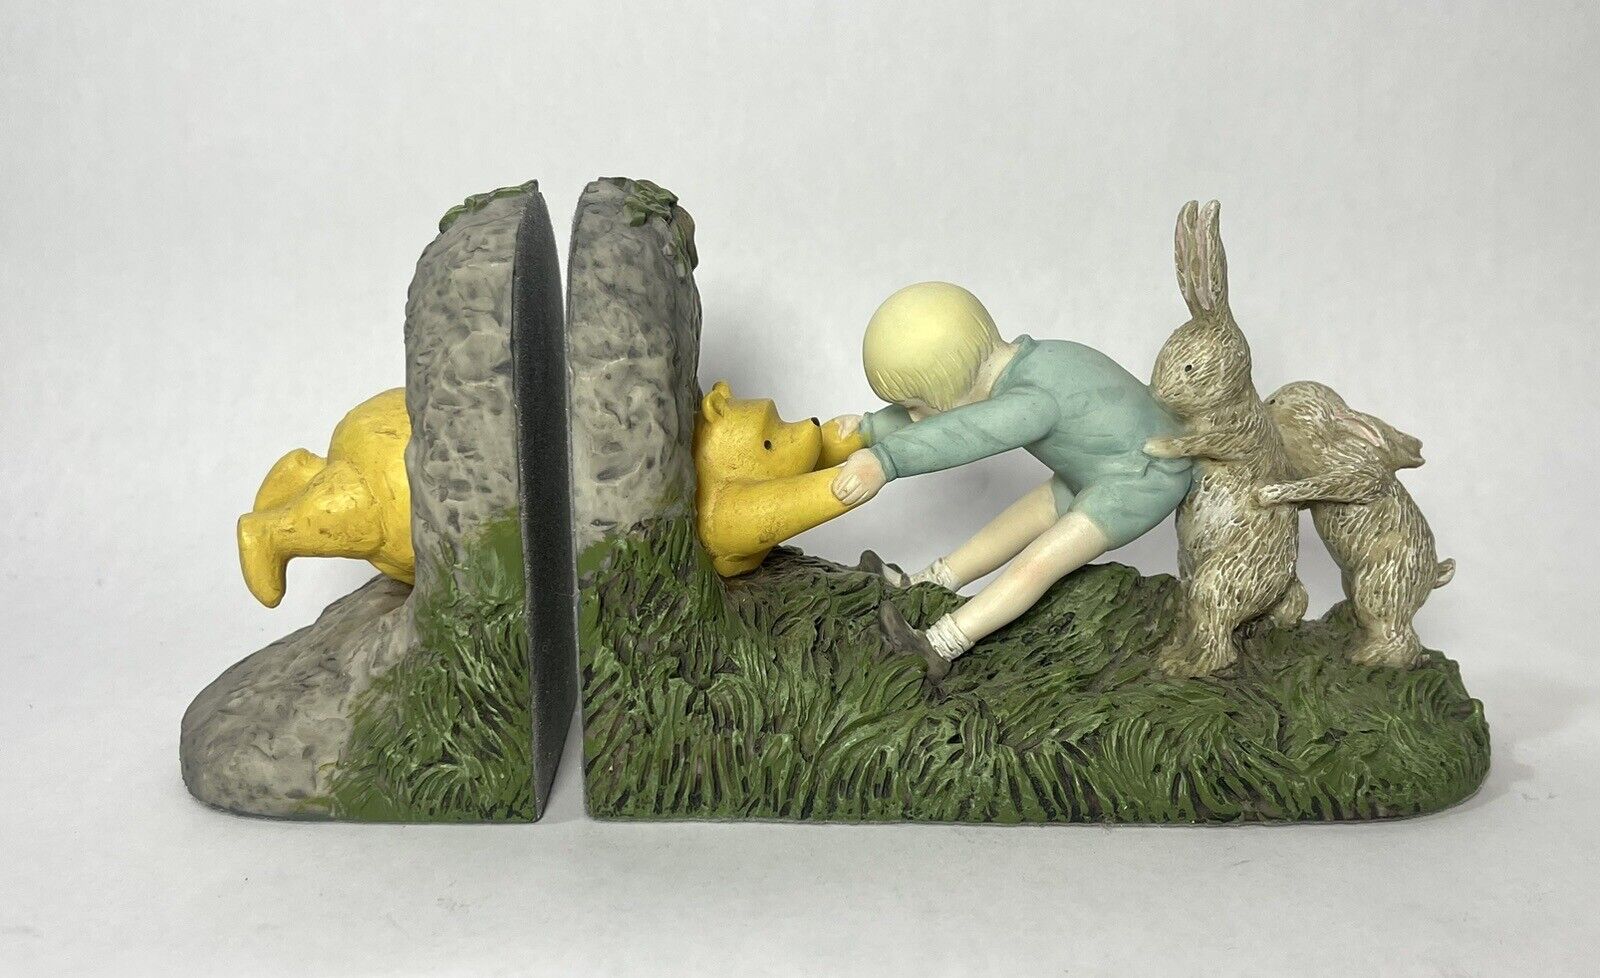 Disney Classic Winnie the Pooh Bookends Wedged In Rabbit Hole Vintage